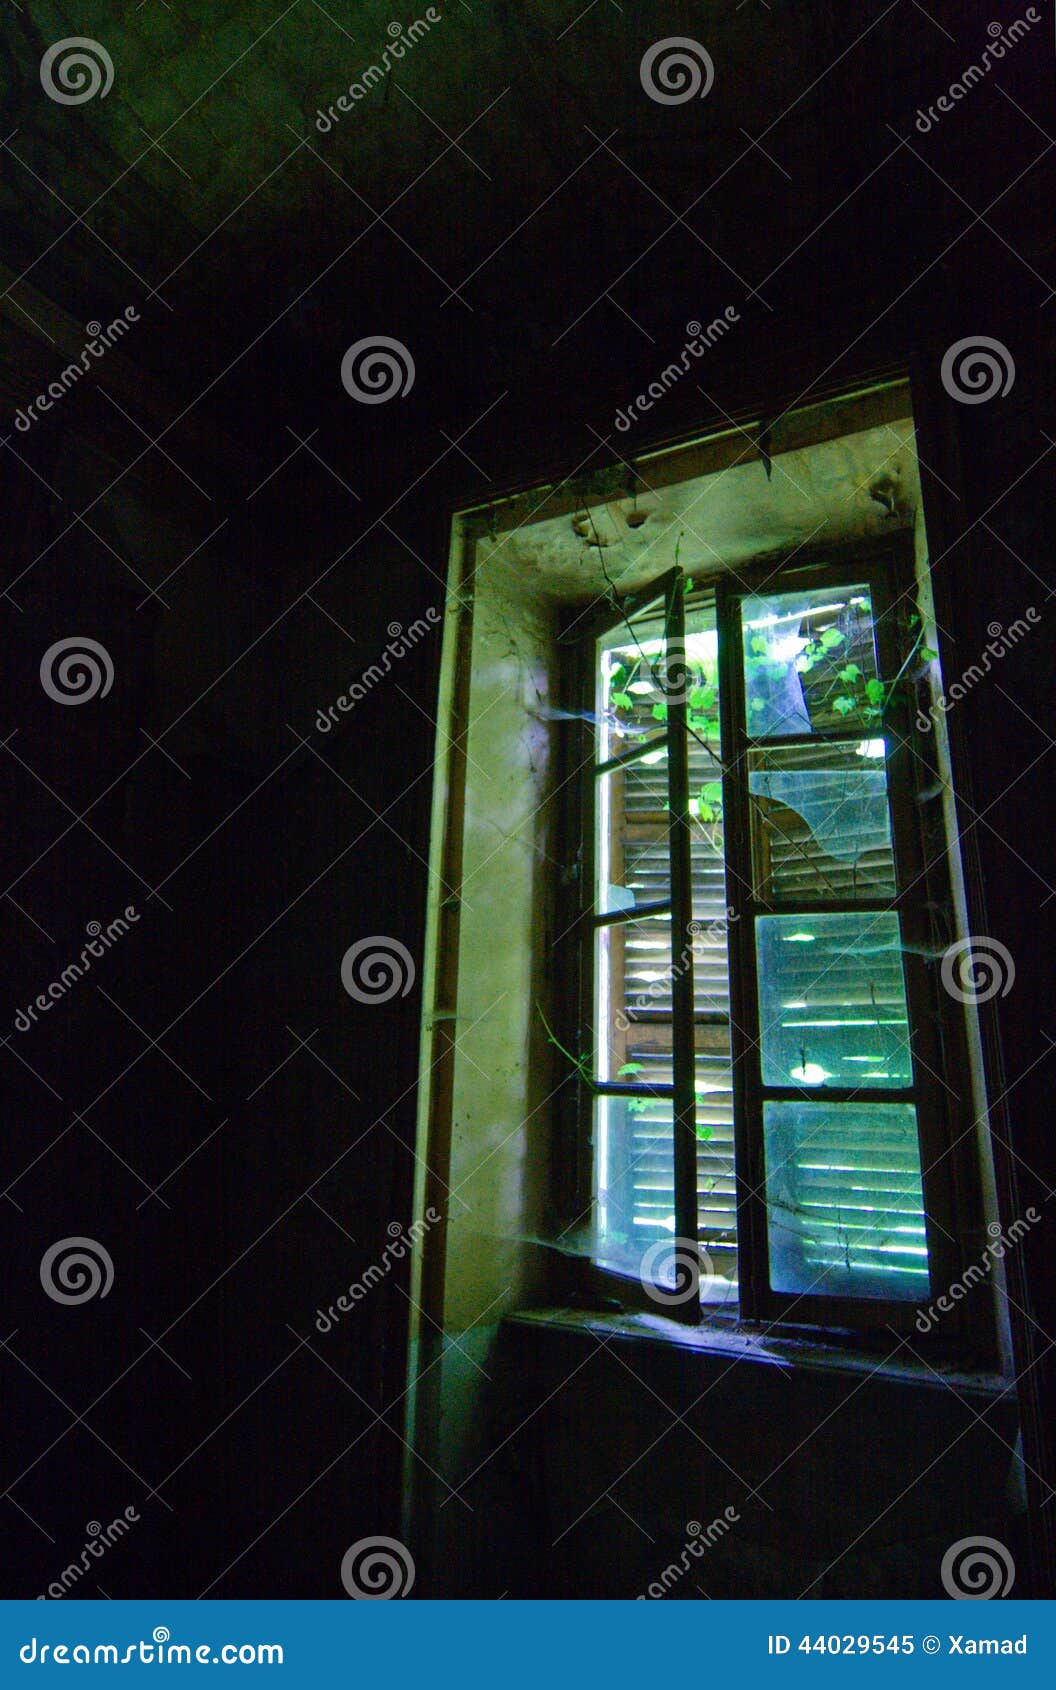 a window with closed shutters